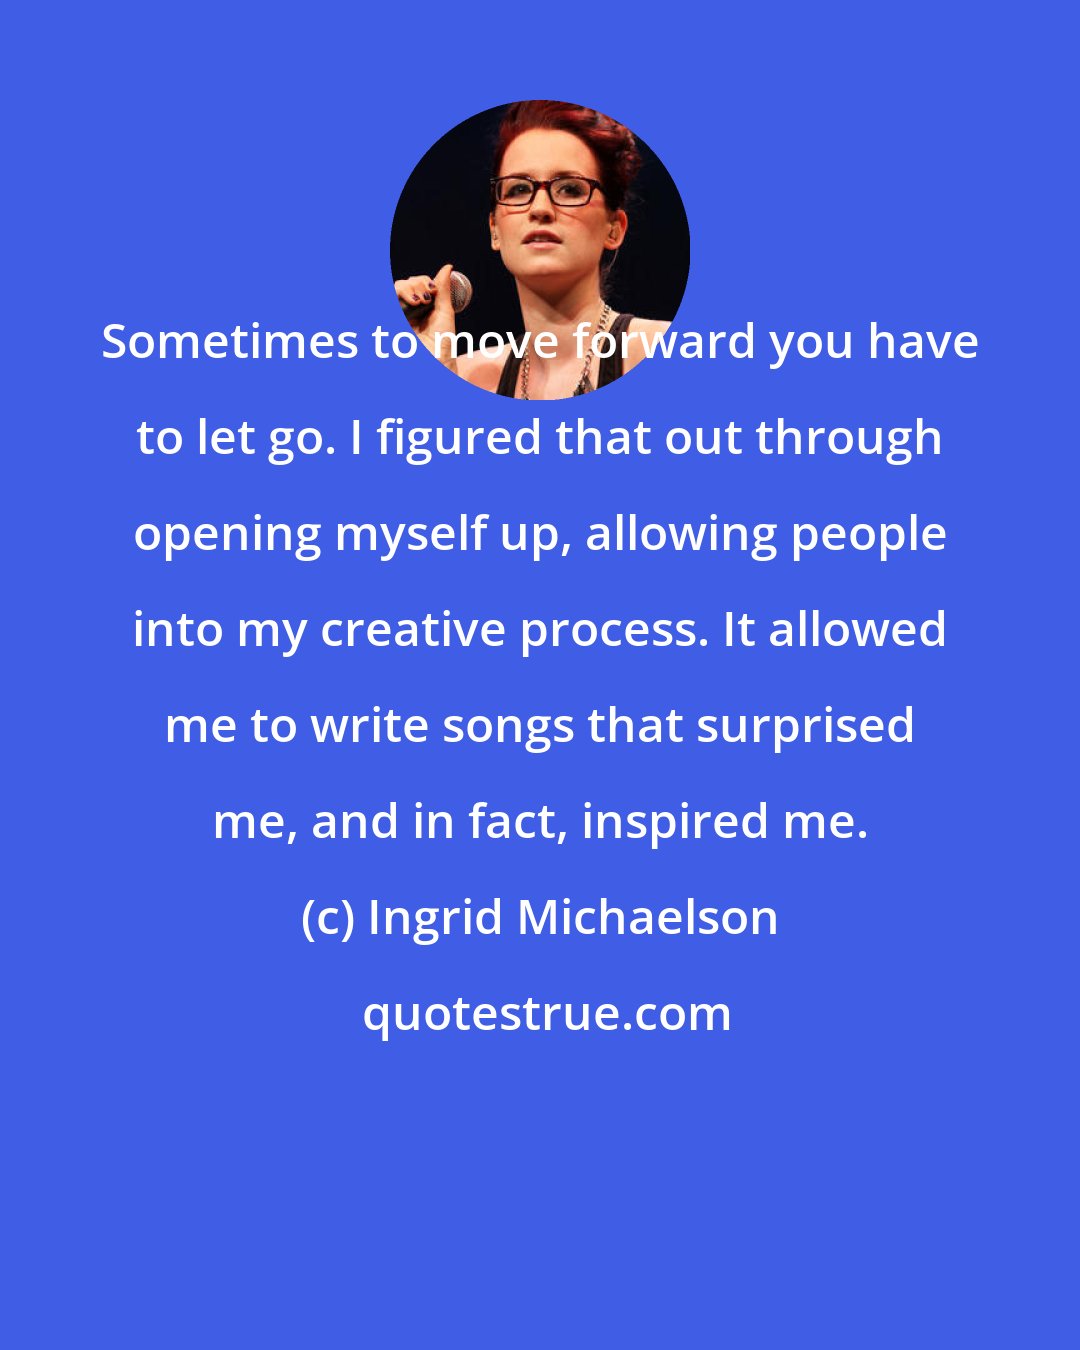 Ingrid Michaelson: Sometimes to move forward you have to let go. I figured that out through opening myself up, allowing people into my creative process. It allowed me to write songs that surprised me, and in fact, inspired me.